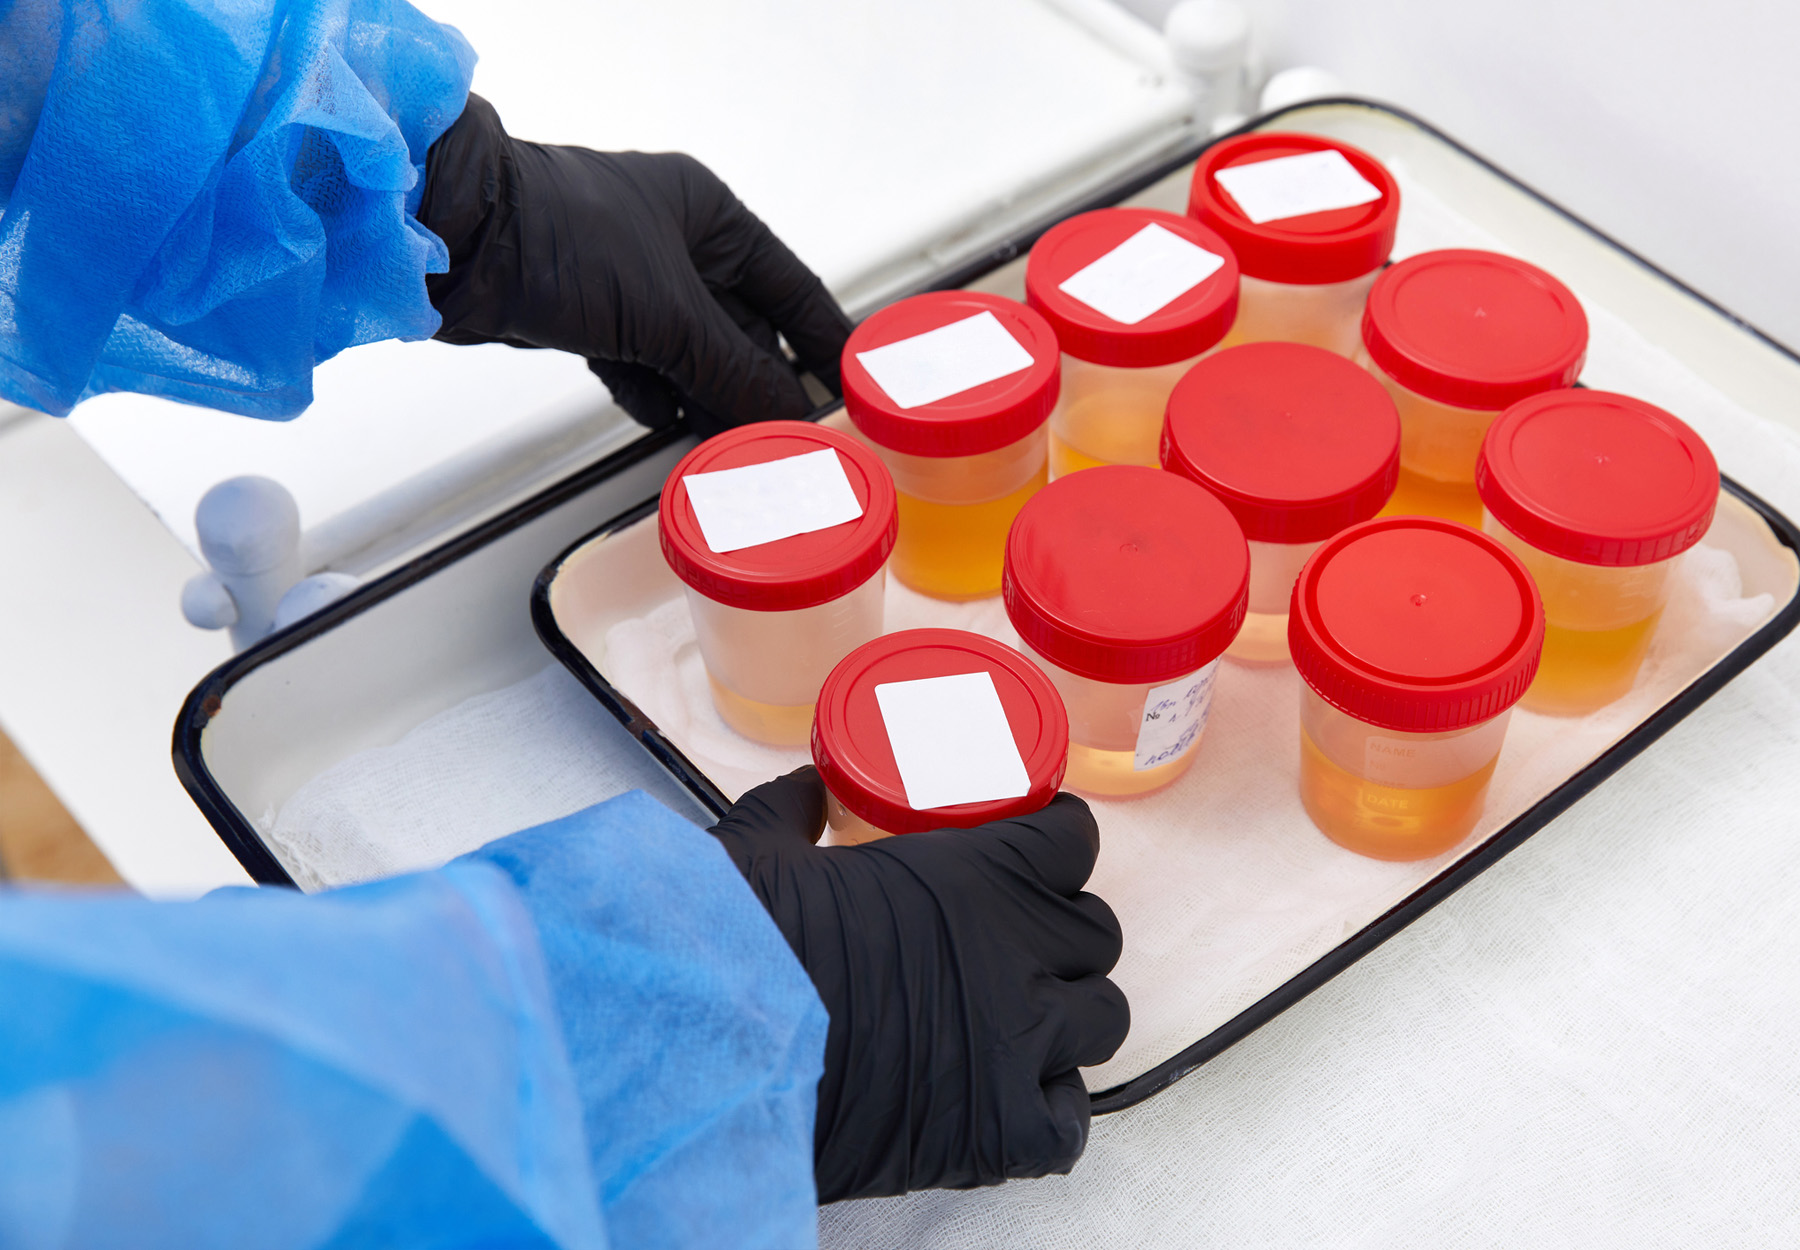 Urine analysis in laboratory. Preparation of urine samples in the hospital for the study. Stock image.